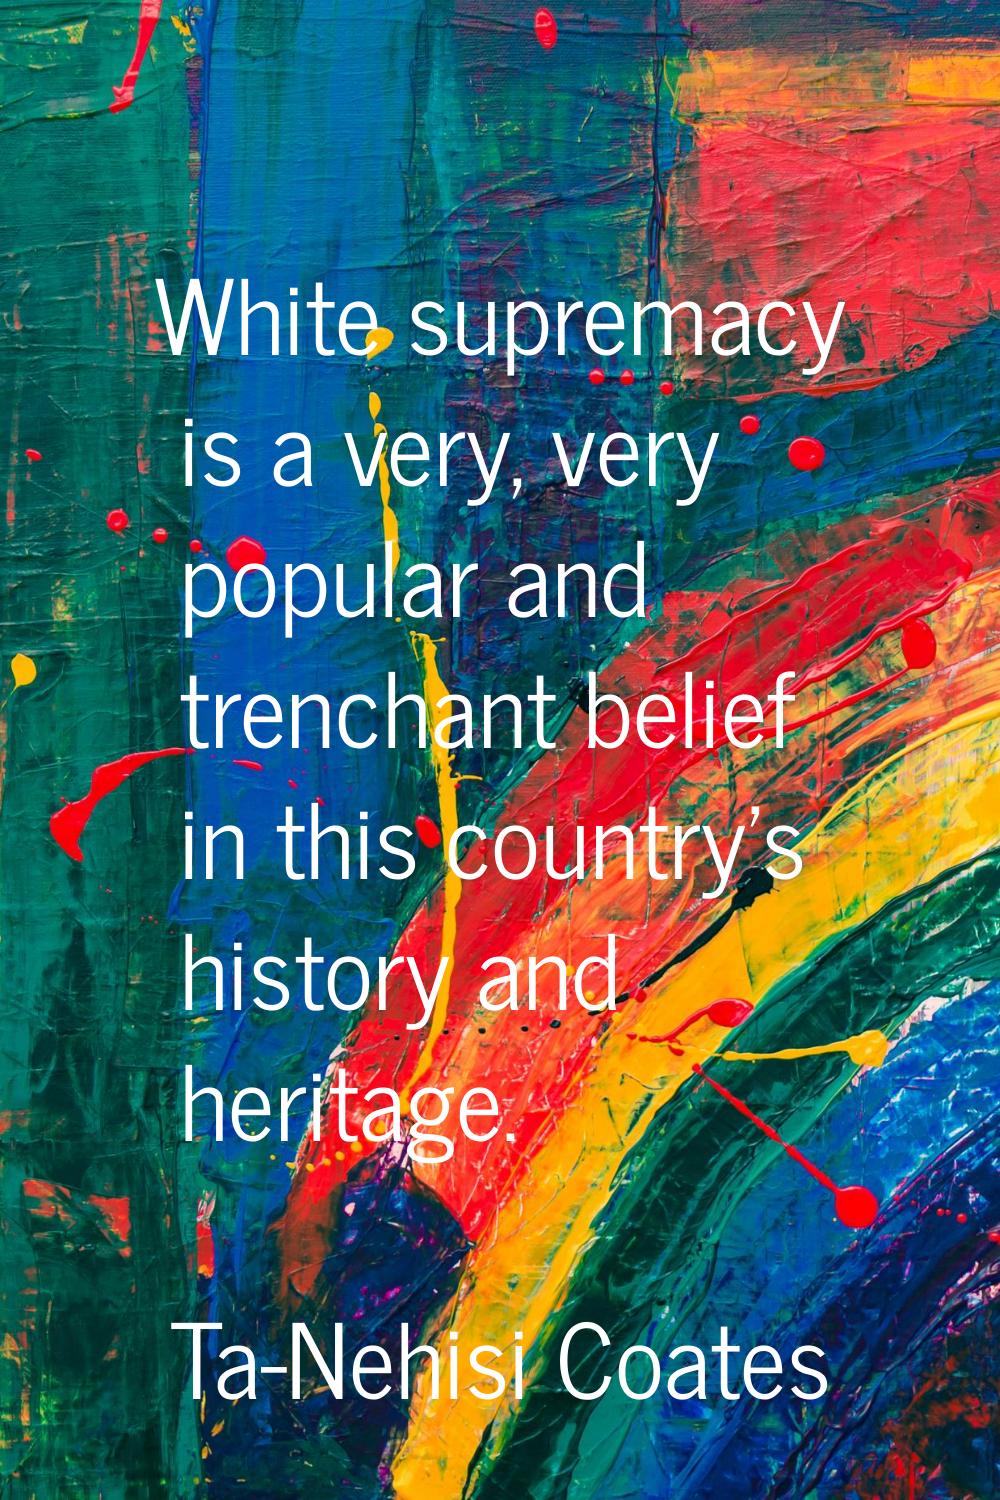 White supremacy is a very, very popular and trenchant belief in this country's history and heritage